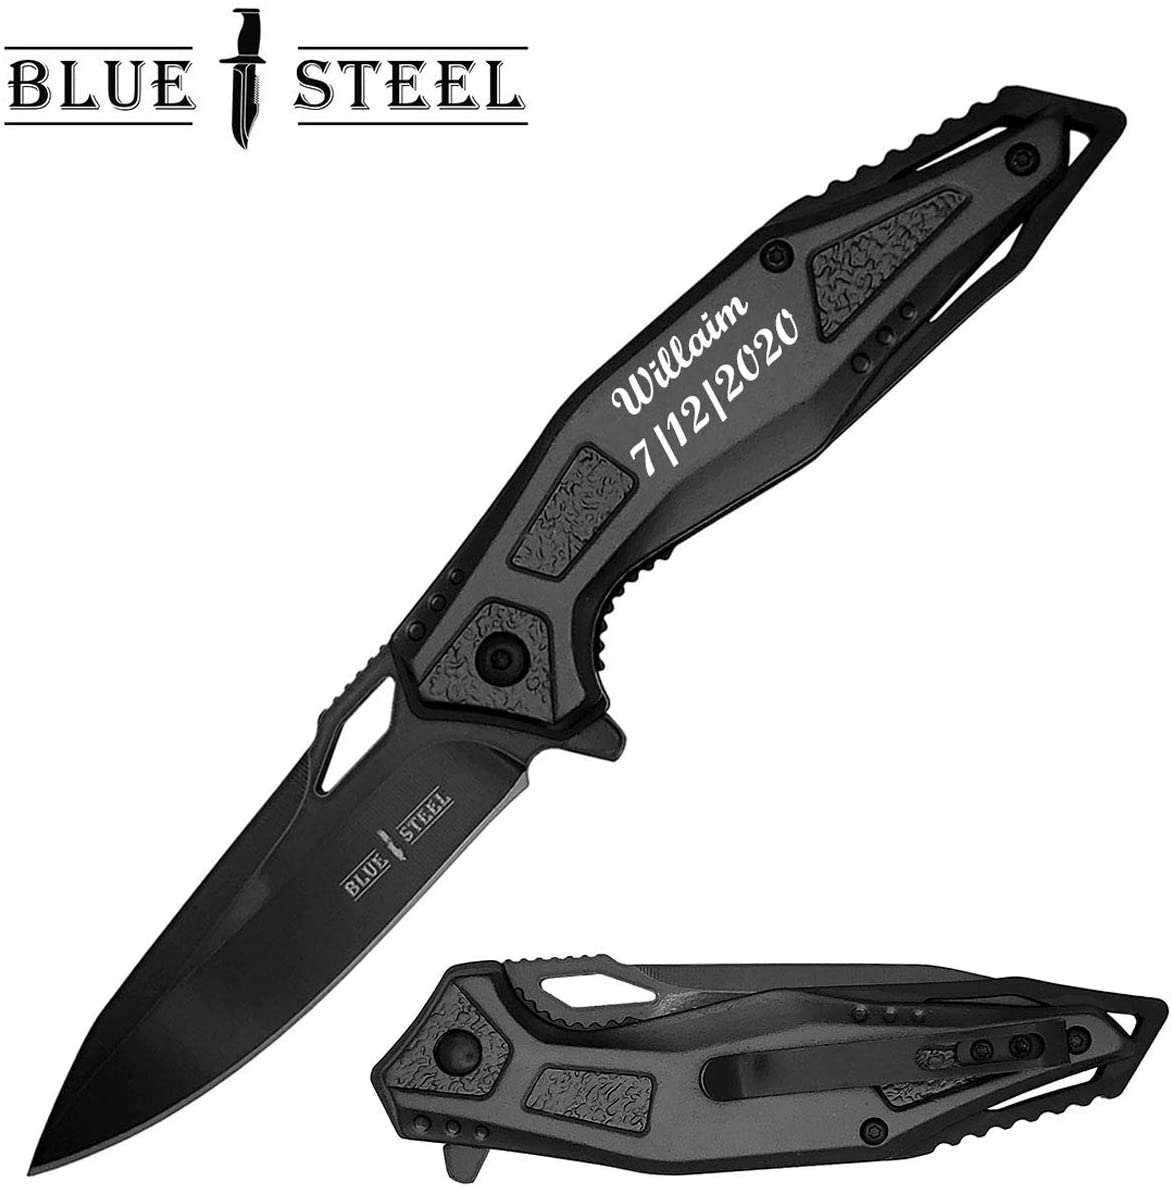 GIFTS INFINITY Stainless Steel Folding Knife with Black Stainless Steel Blade, Engrave Pocket Knife, Gifts for Boyfriend (BT-70RBK)